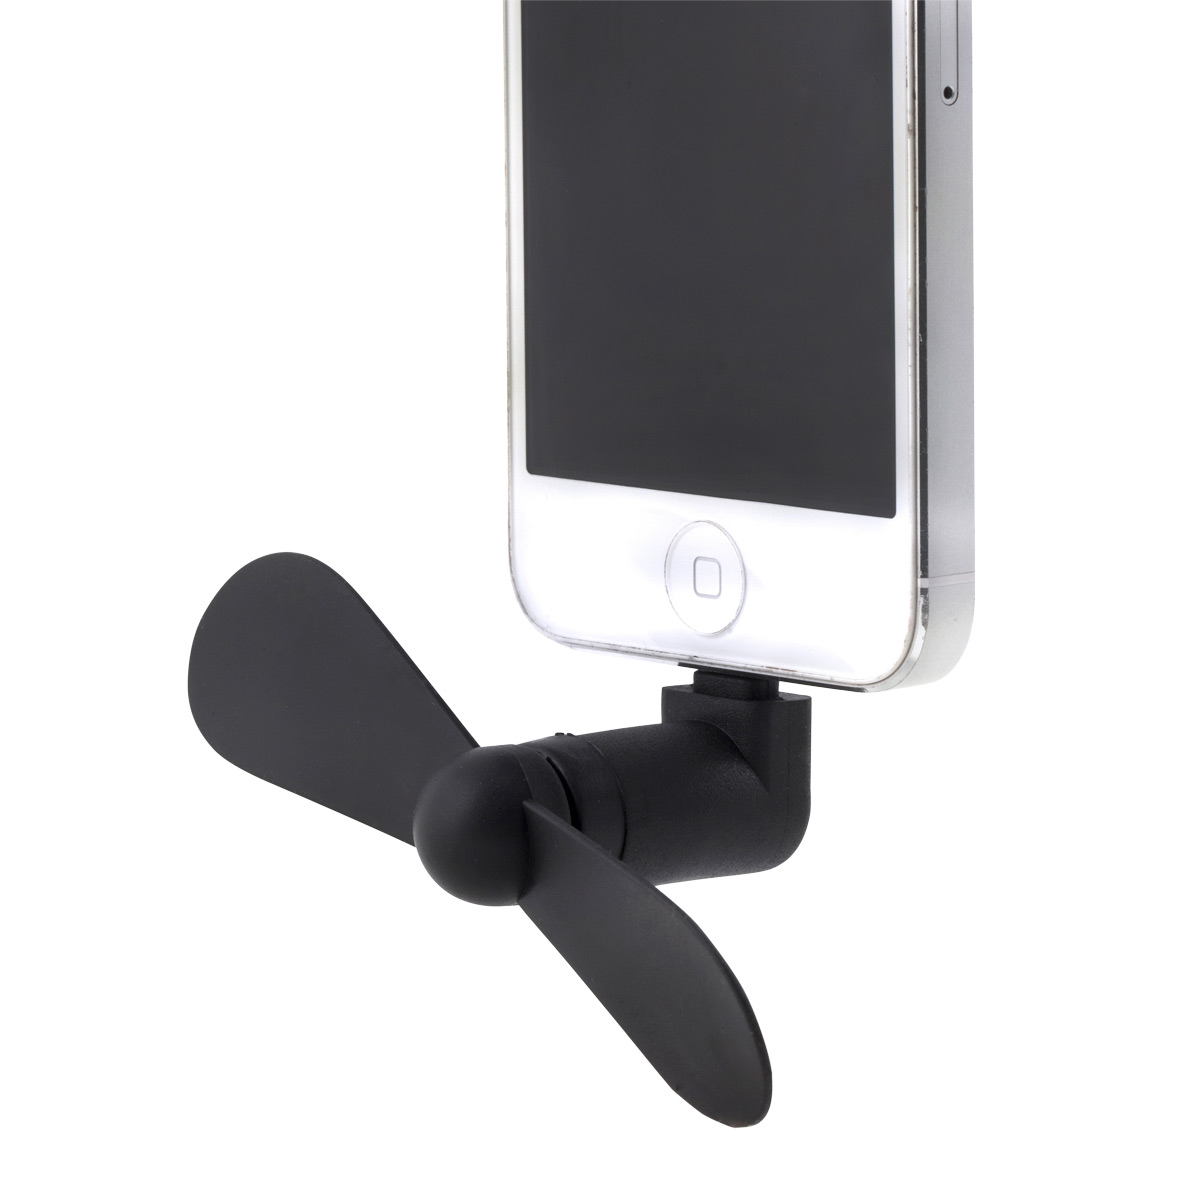 Kikkerland iPhone Fan | The Container